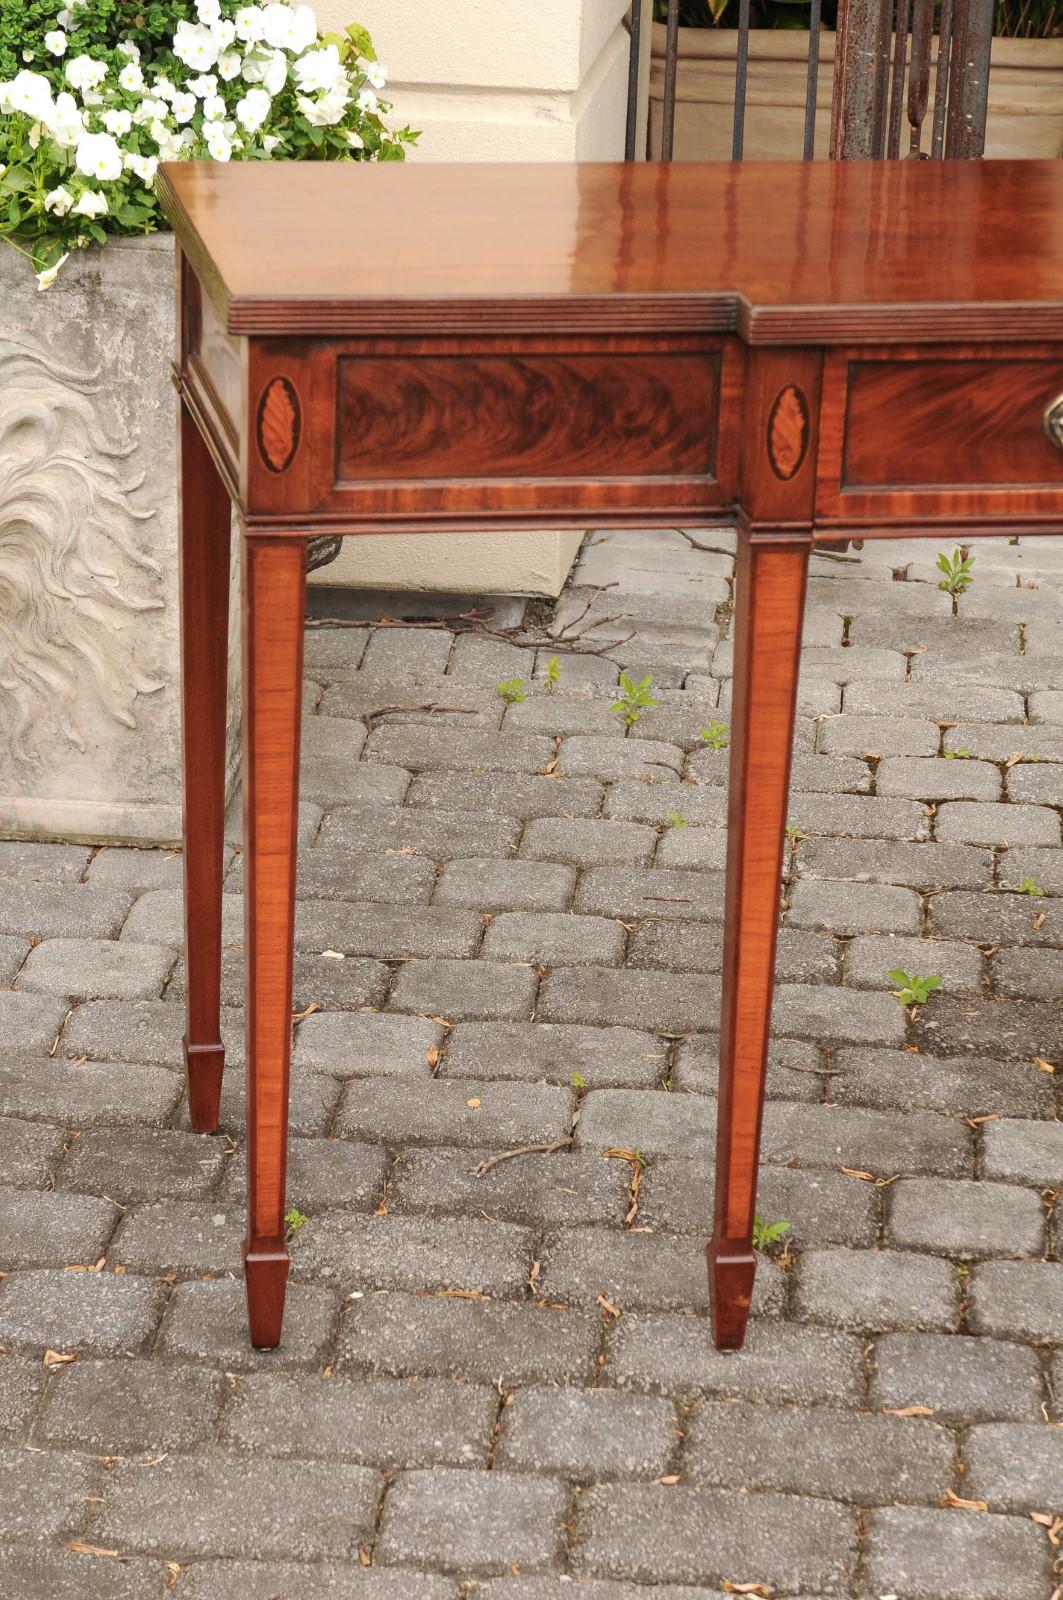 An English Neoclassical style mahogany breakfront sideboard server from the mid 19th century with flaming accents, long single drawer and tapered legs. Born in England during the third quarter of the 19th century, this exquisite breakfront server